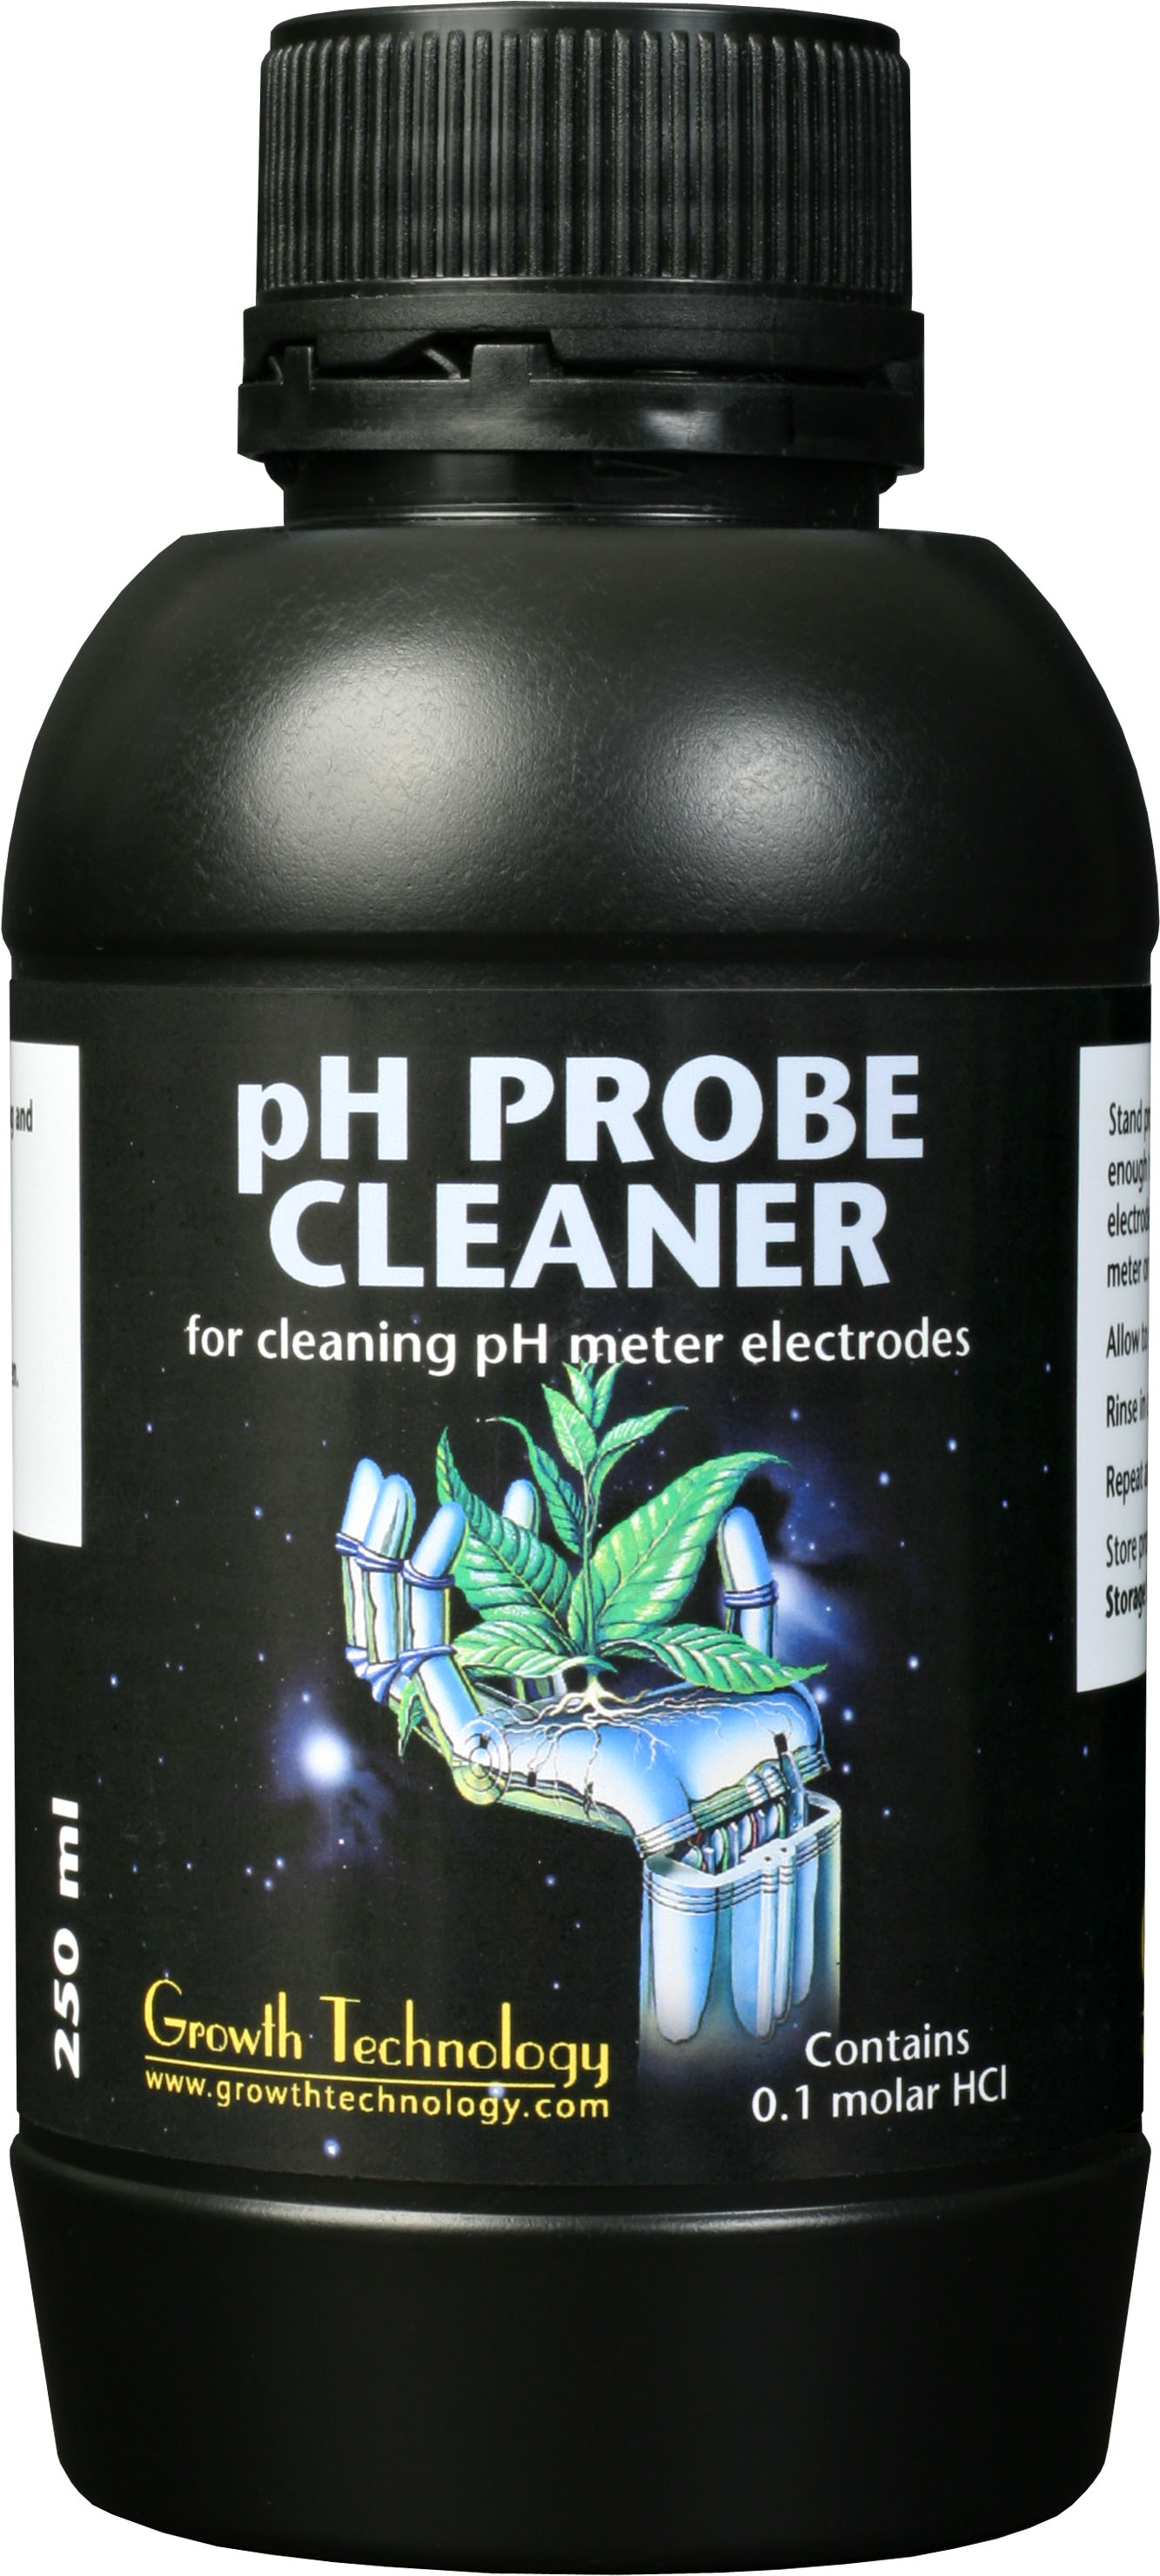 Cleaning and pH Probe Storage